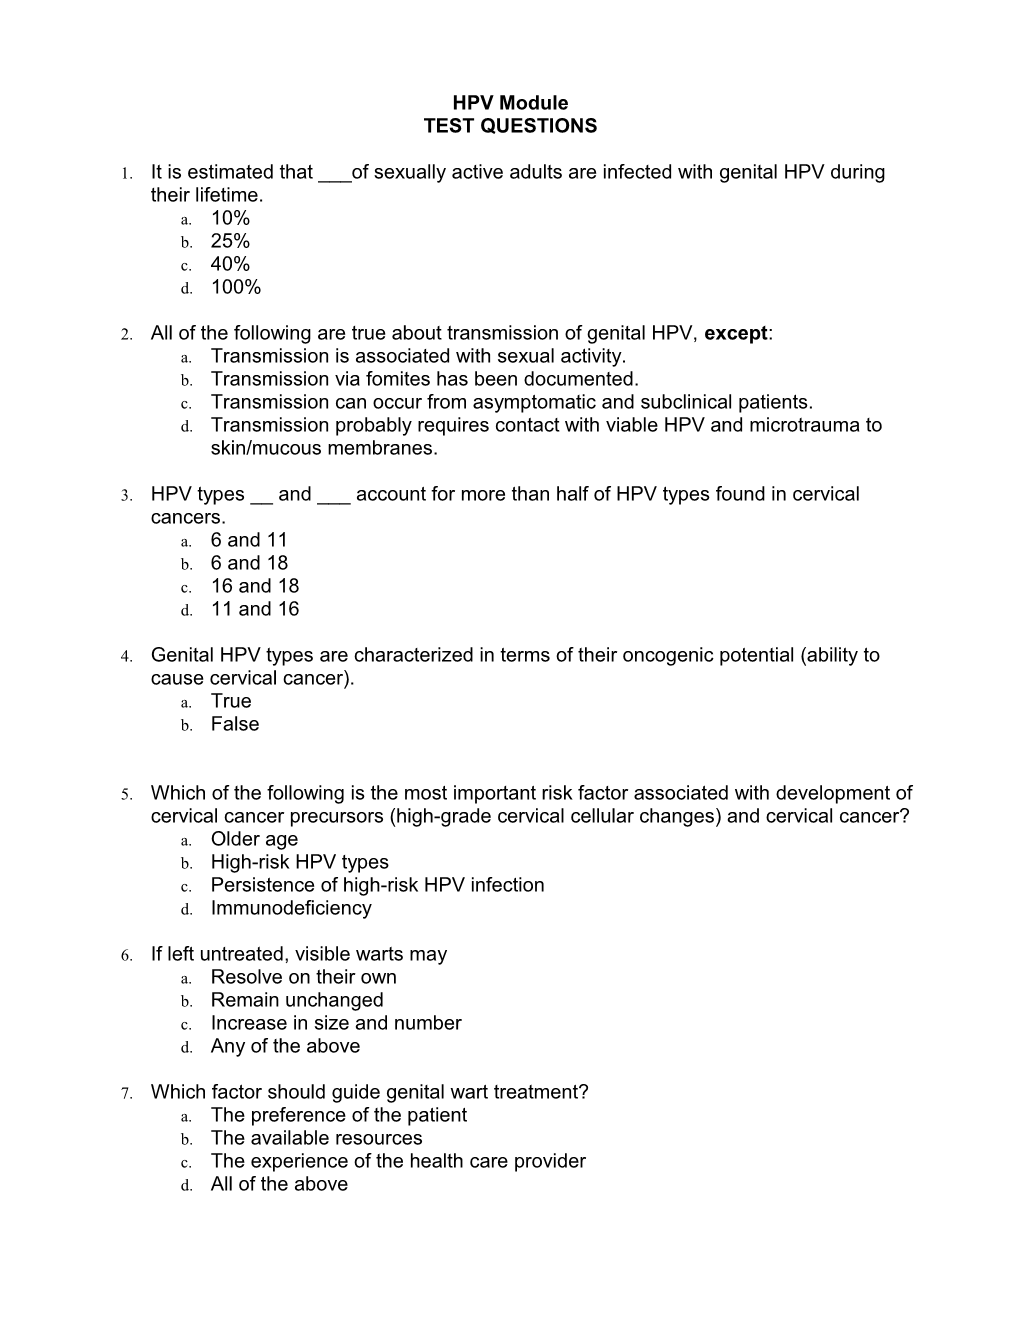 HPV Module Test Questions